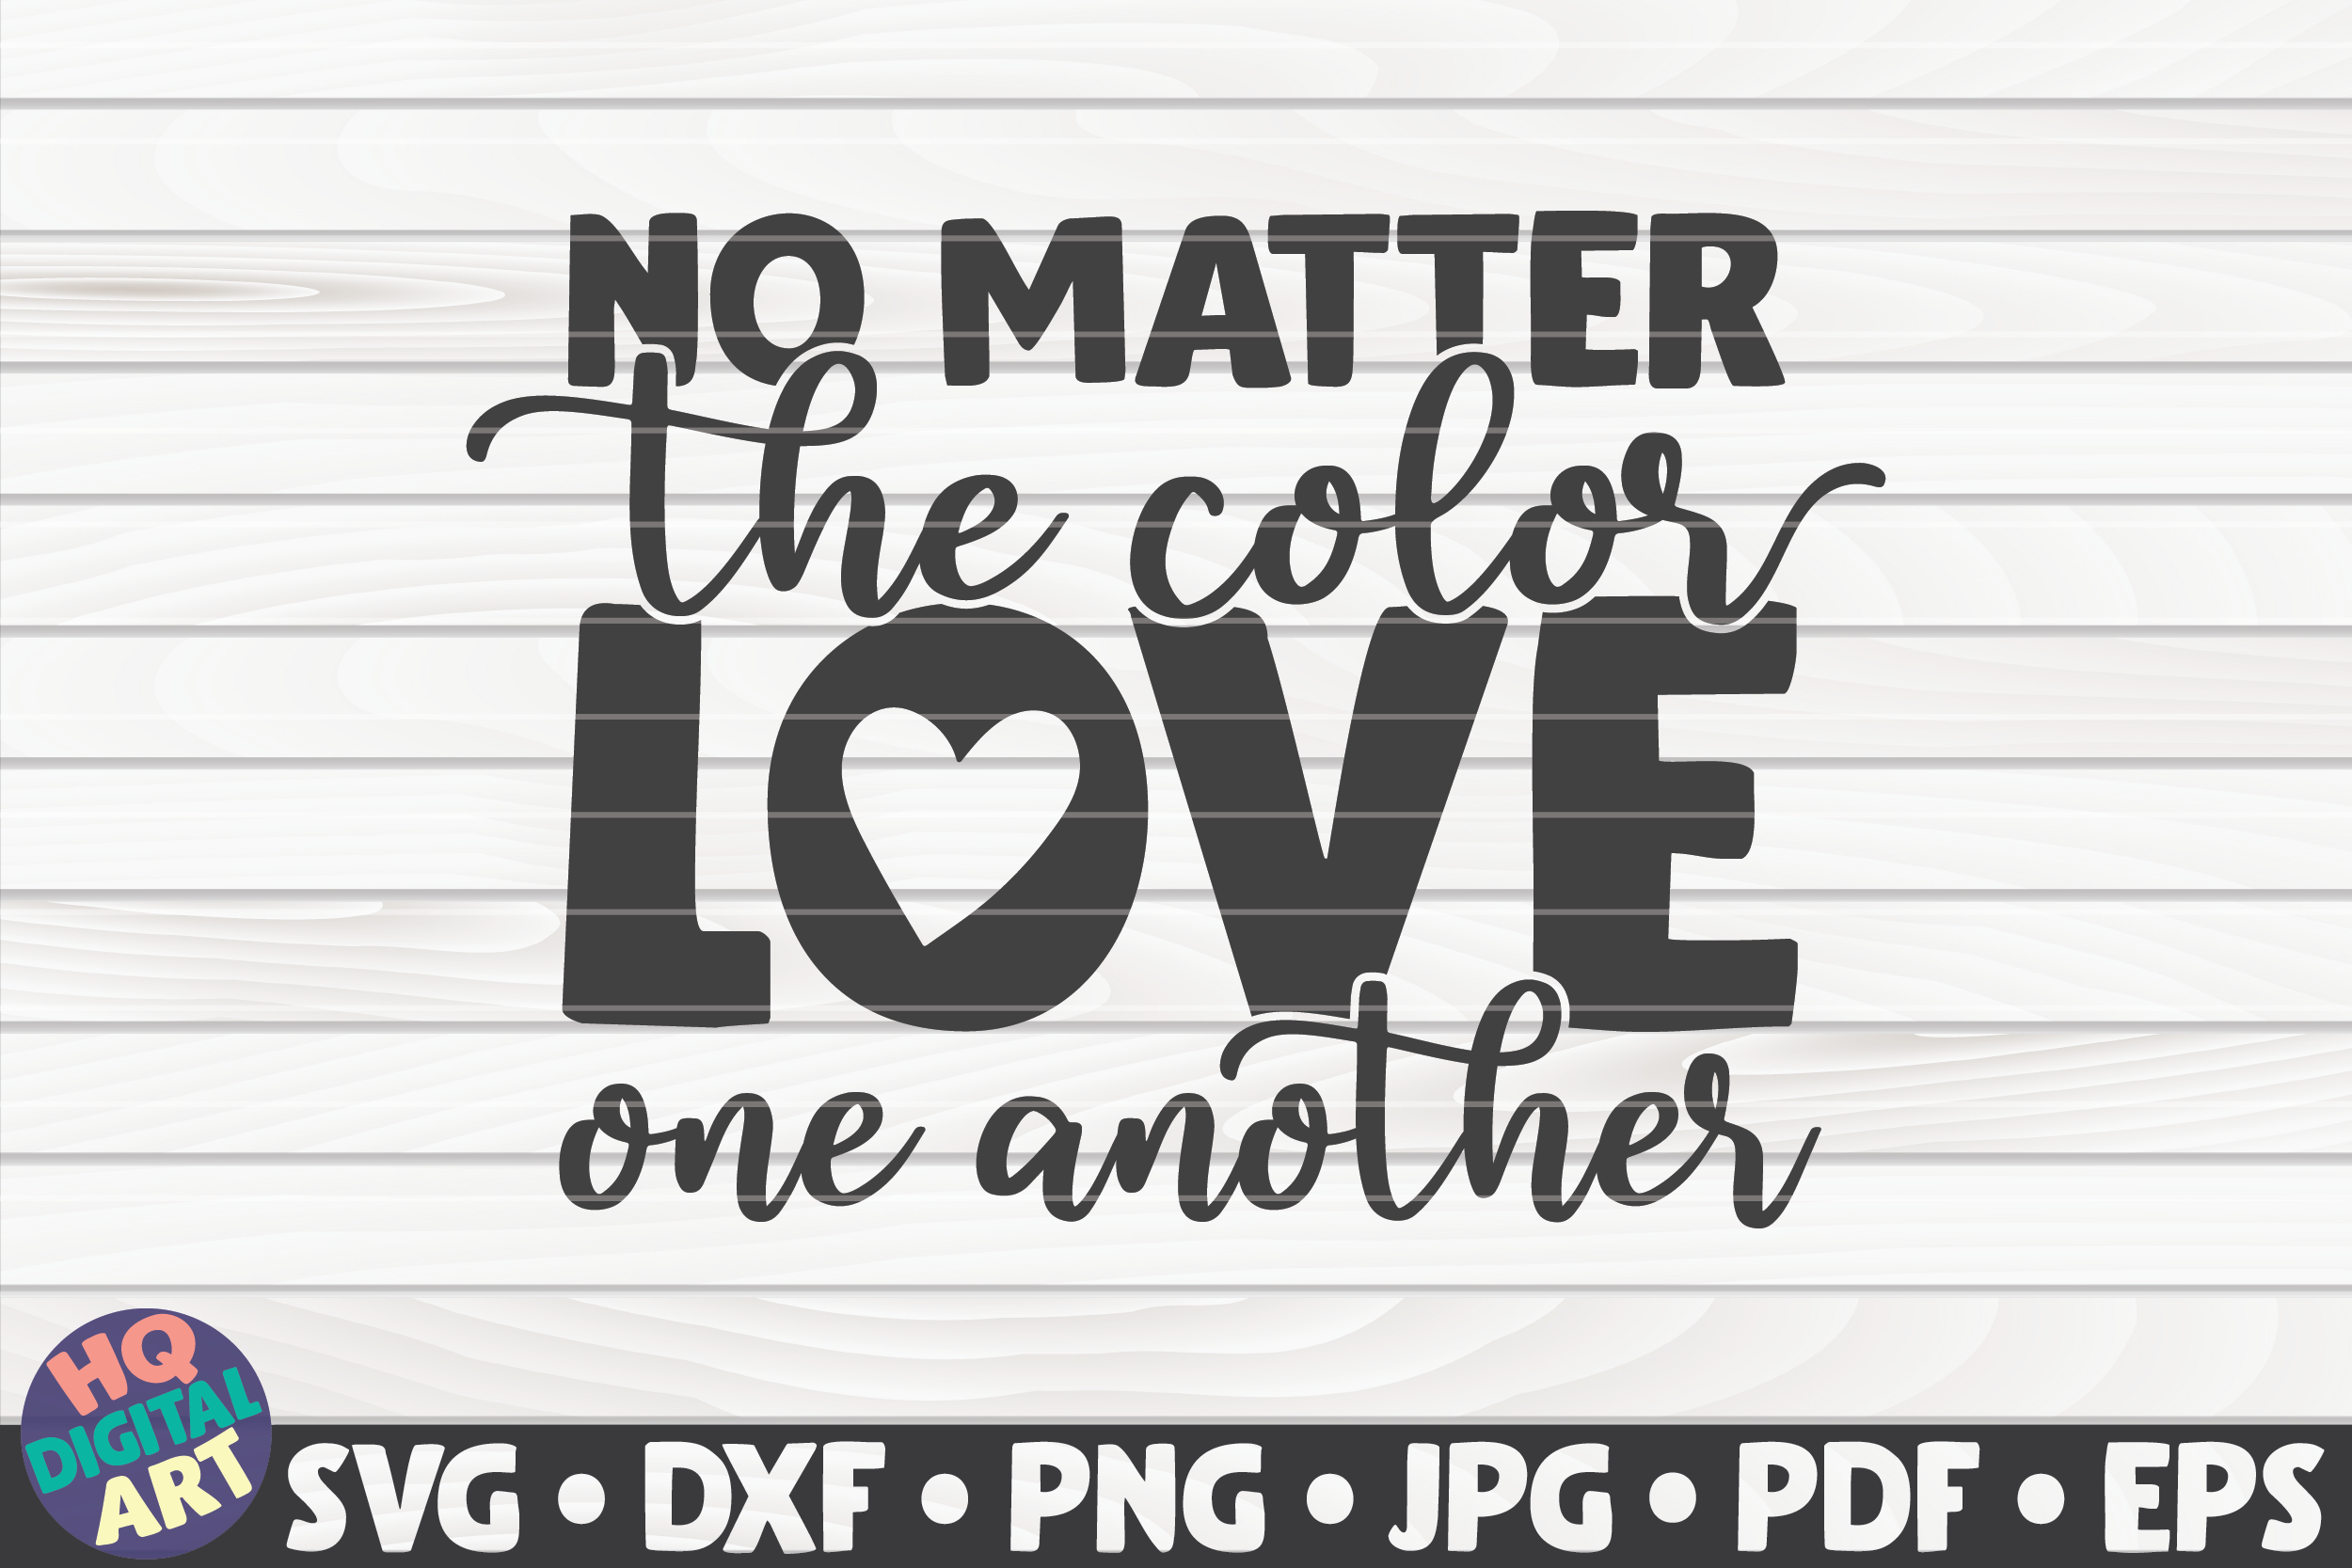 Download No Matter The Color Love One Another Svg Blm Quote By Hqdigitalart Thehungryjpeg Com